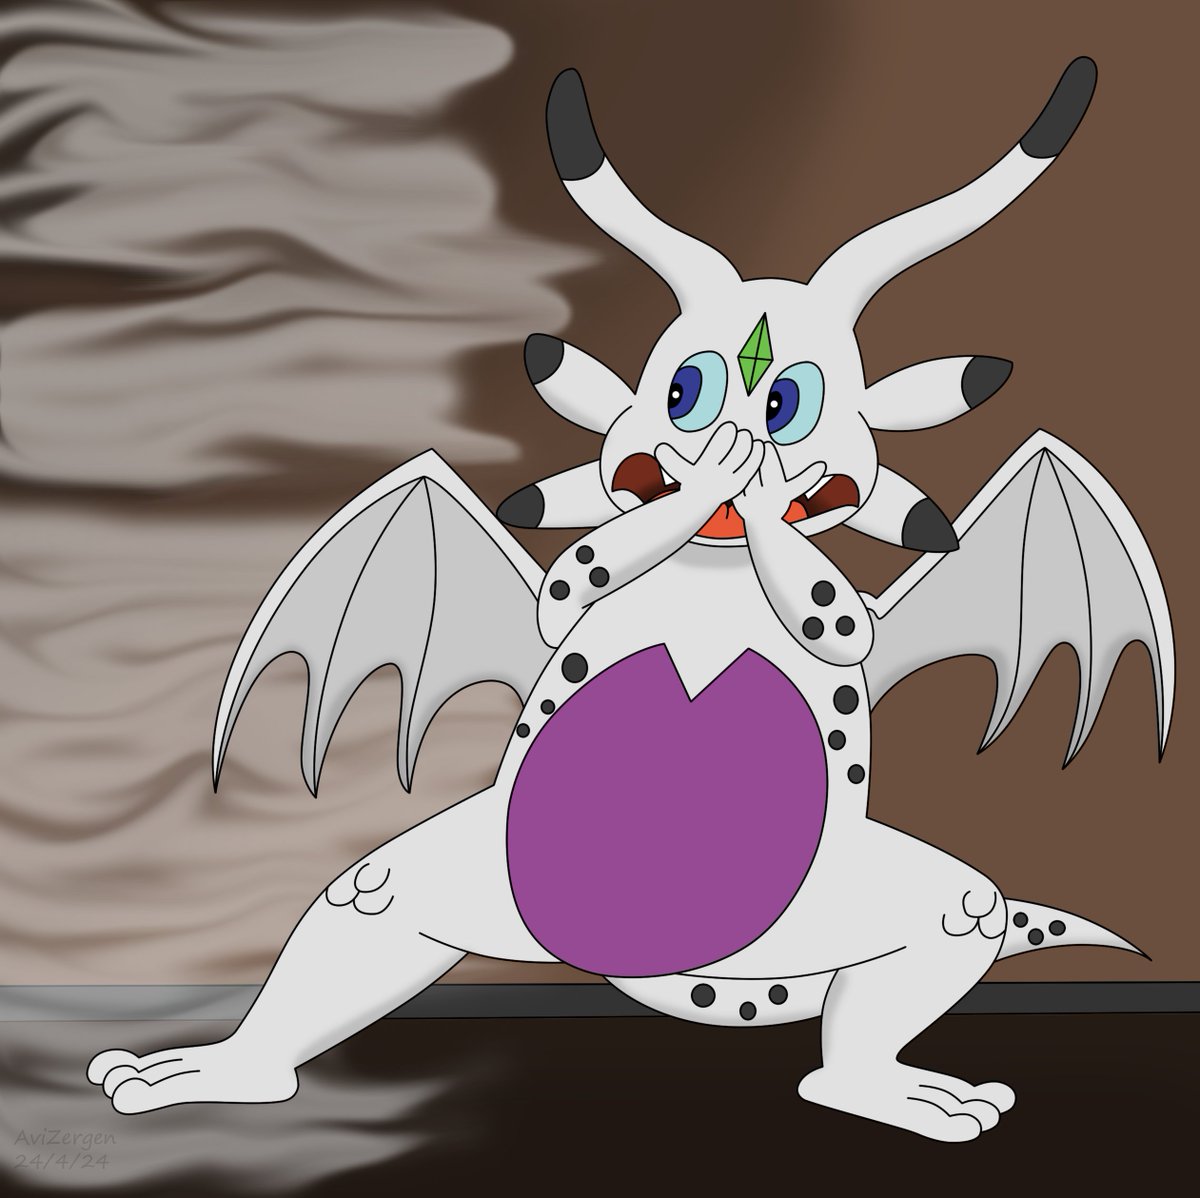 Uthy: Ugh.... what is that?! Don't inhale it Uthy! #AviZergen #Uthy #dragon #cartoon